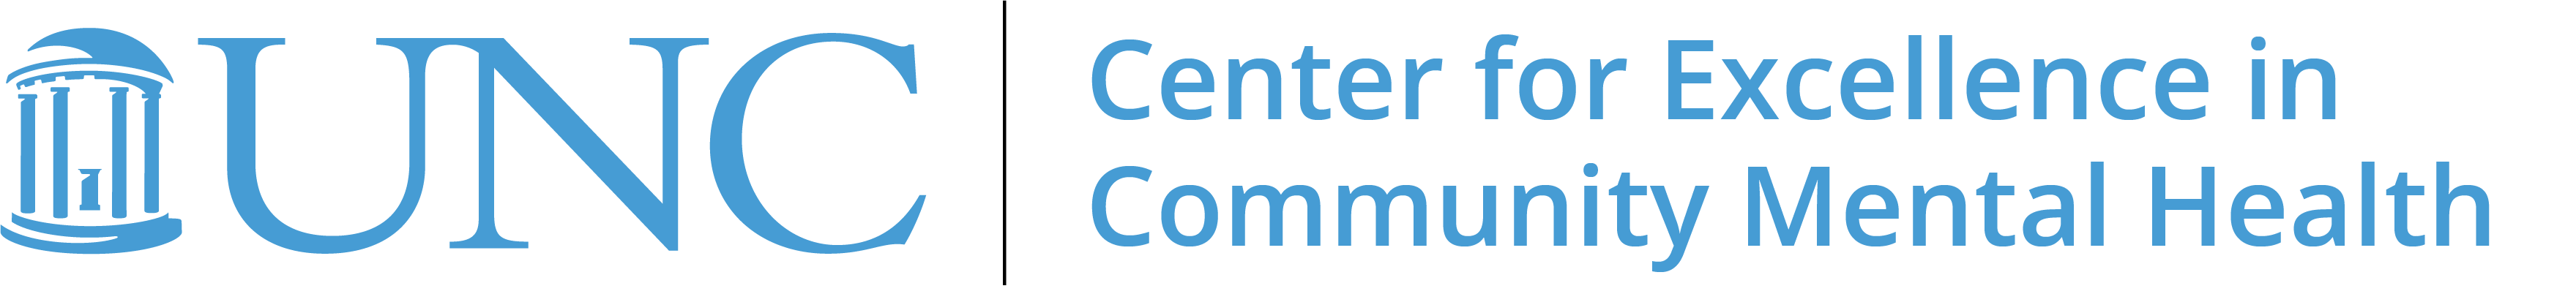 UNC Center for Excellence in Community Mental Health